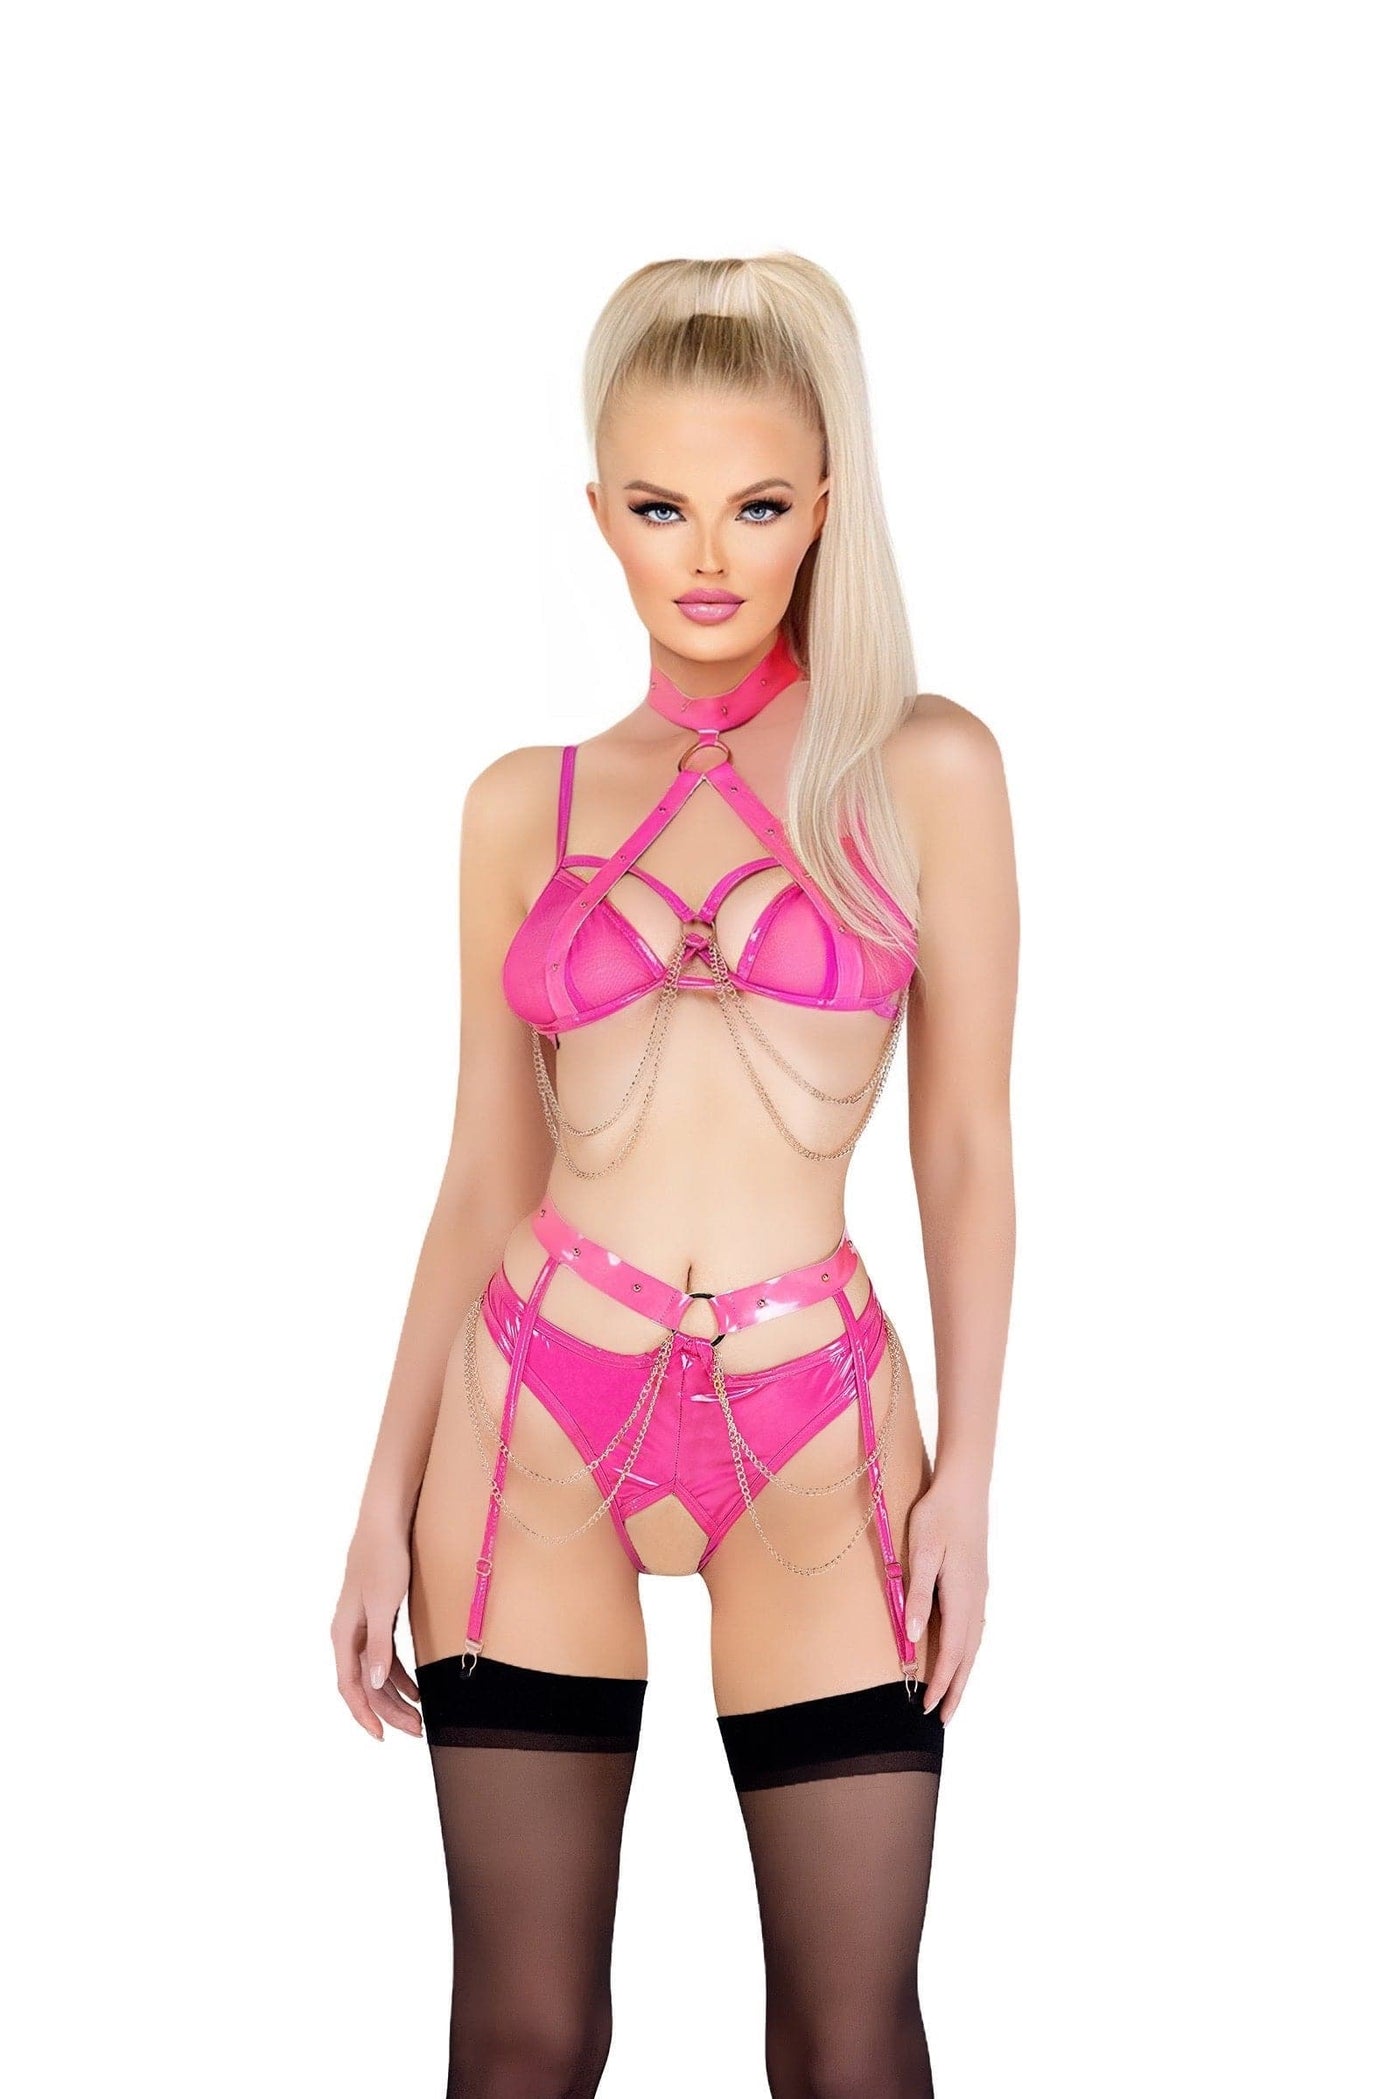 Lexine Ultra Sexy Bra and Panty Set - For Love of Lingerie